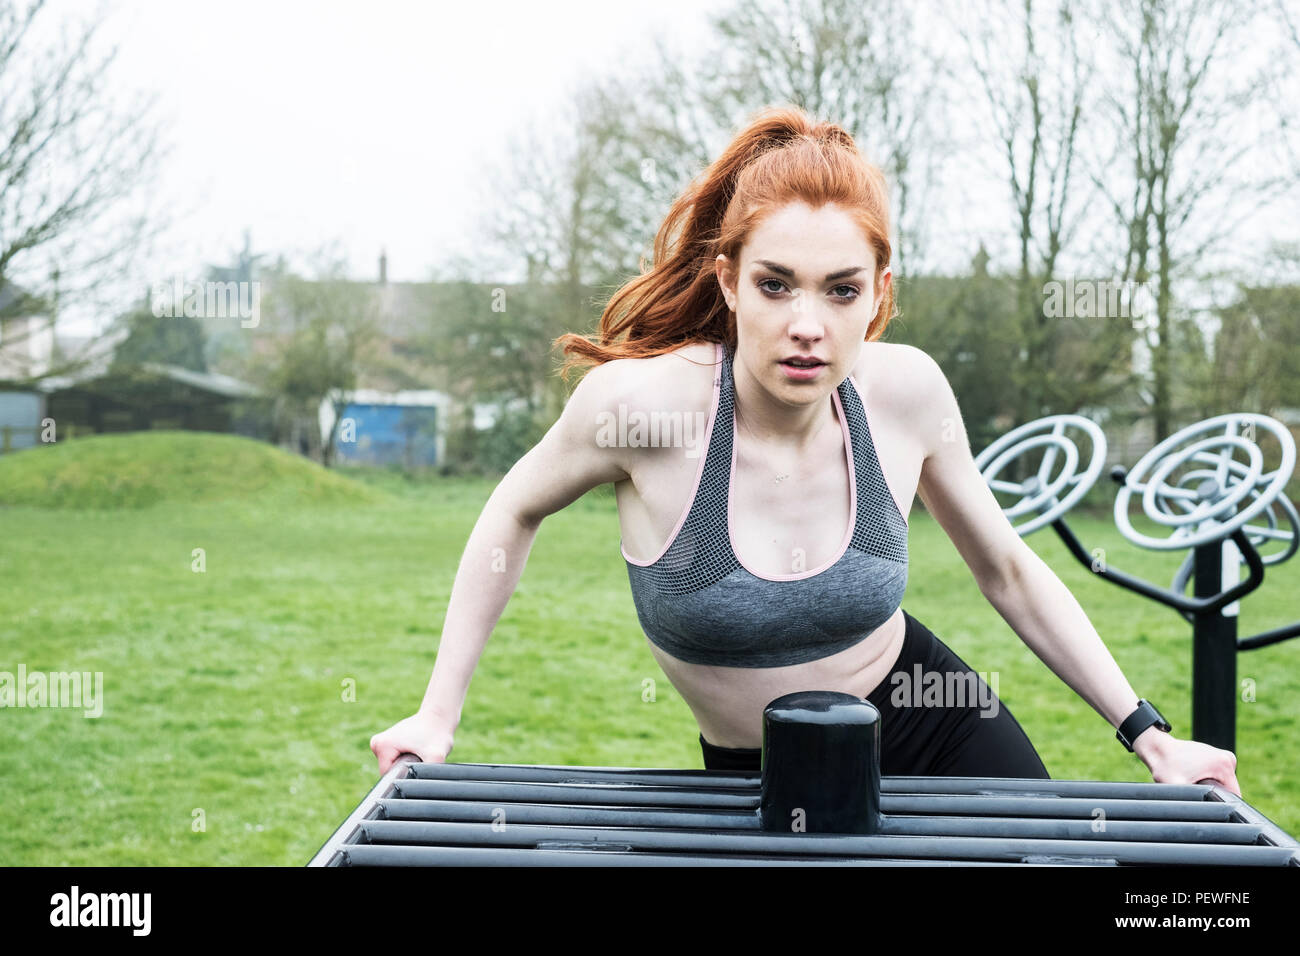 Young woman with long red hair wearing sportswear, using outdoor exercise machine, looking at camera. Stock Photo